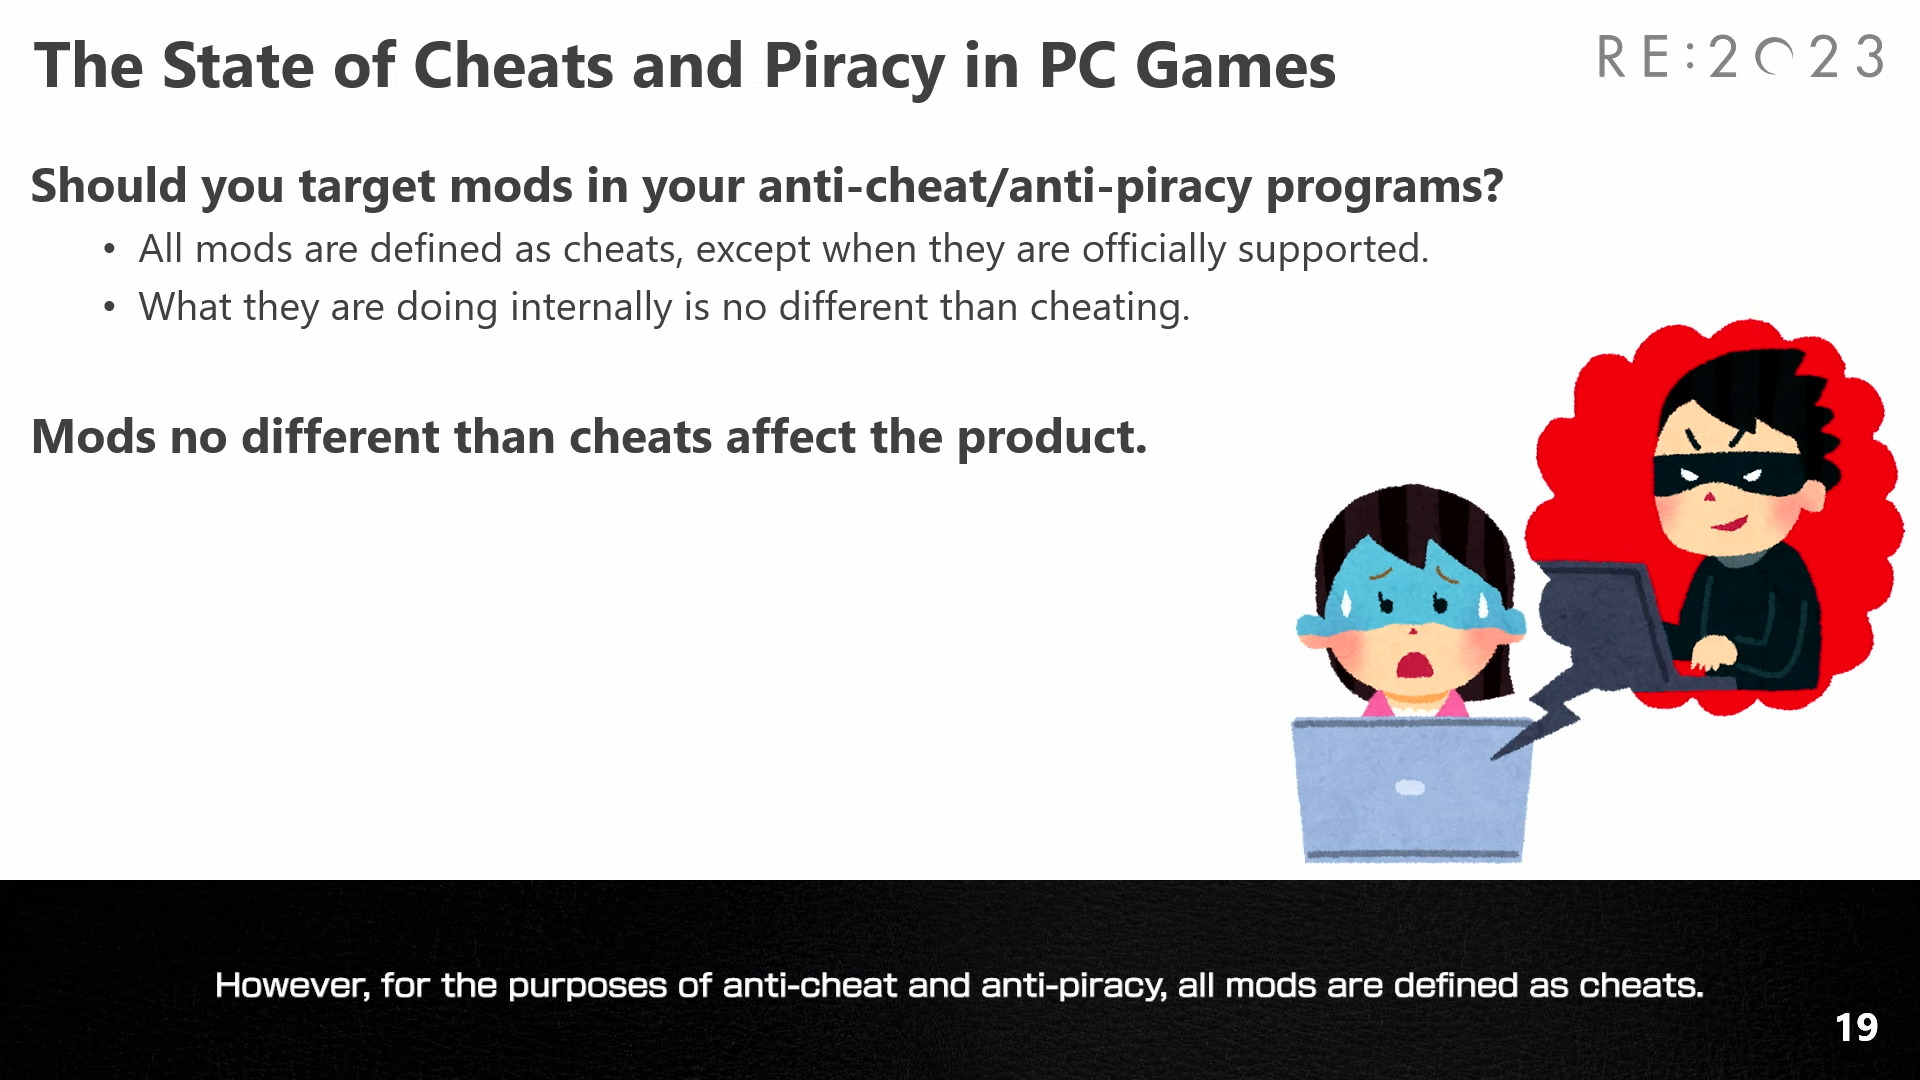 Taro Yahagi hosts the 'Anti-cheat and Anti-Piracy Measures in PC GamesRecommendations for In-House Production' at Capcom's RE:2023 Conference